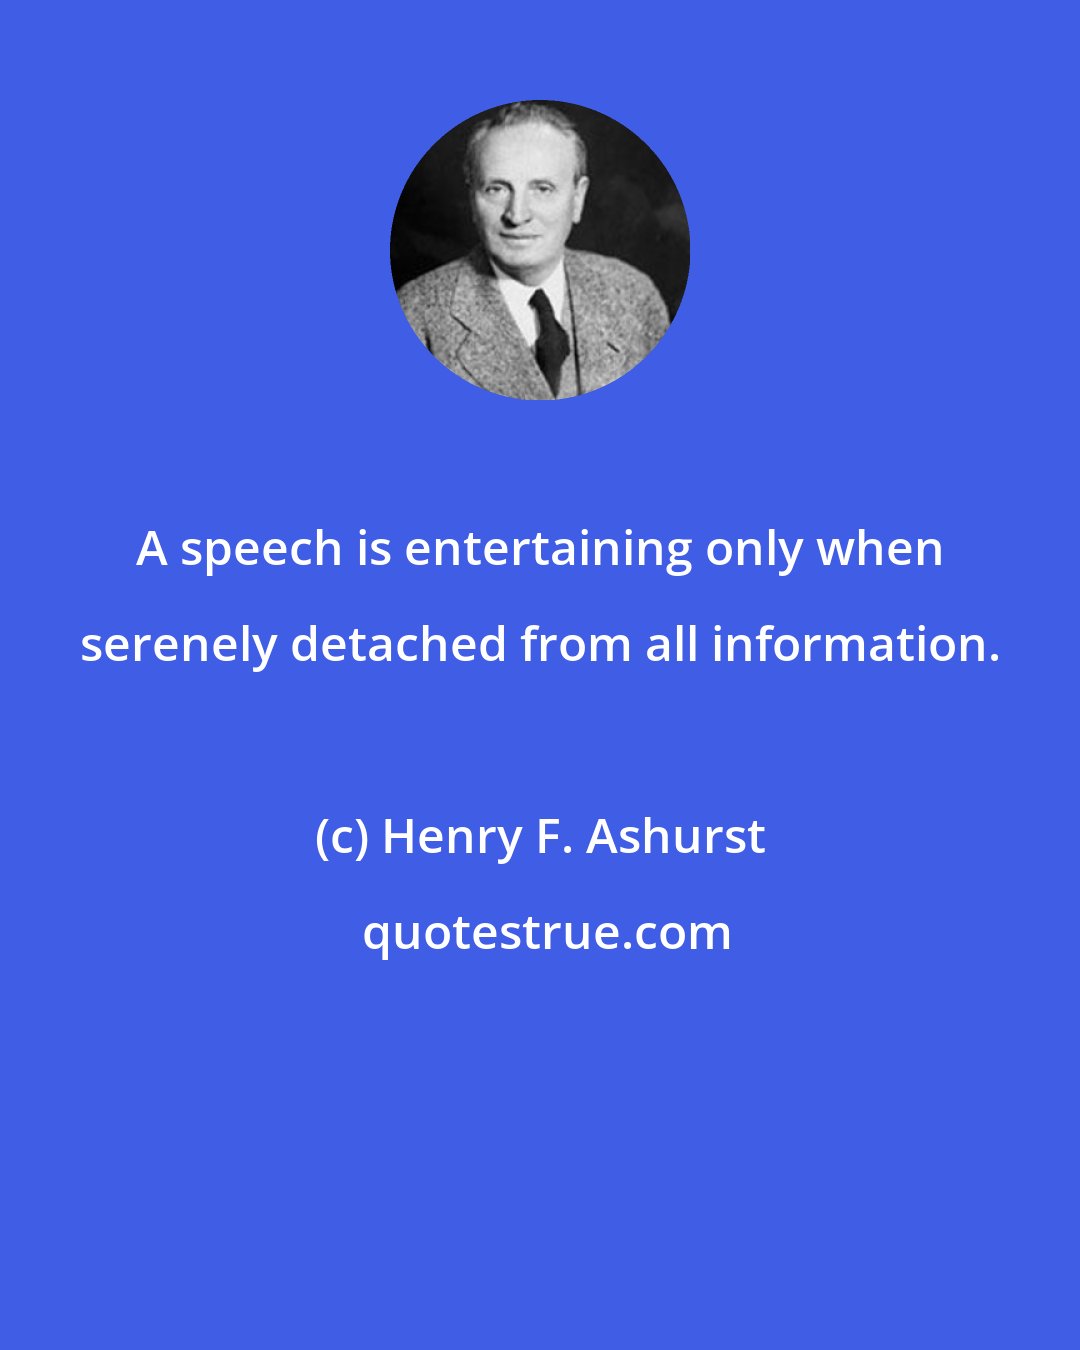 Henry F. Ashurst: A speech is entertaining only when serenely detached from all information.